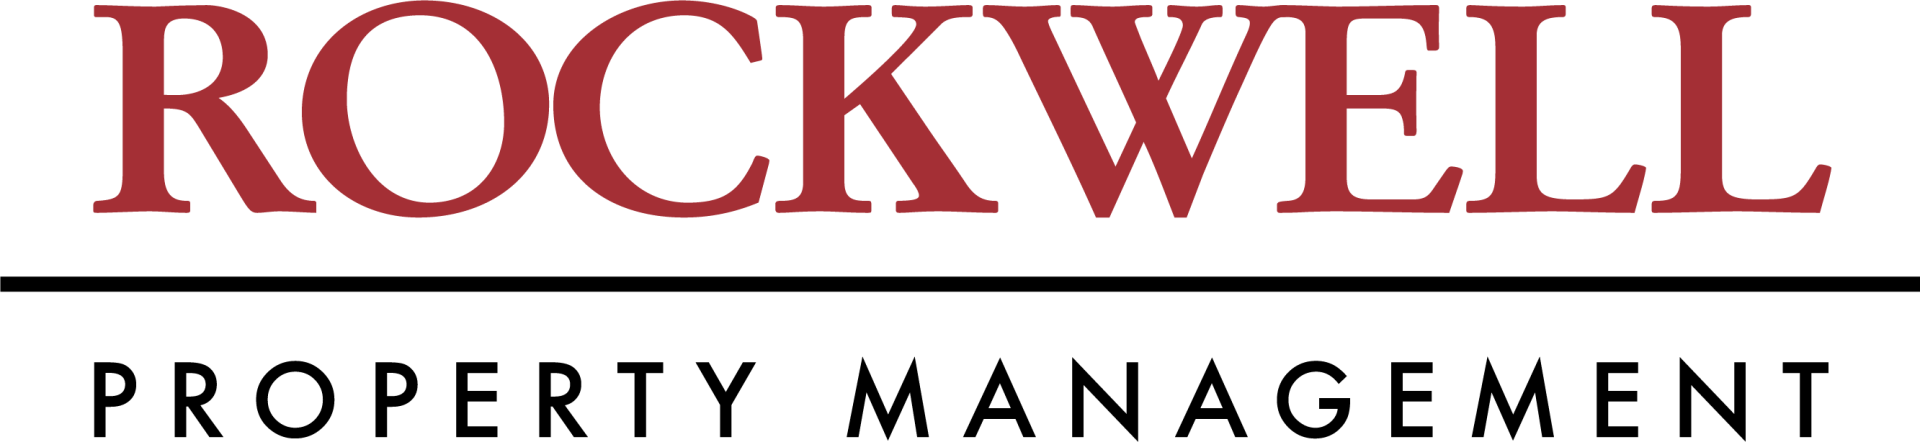 Rockwell Property Management Logo - Click to go home